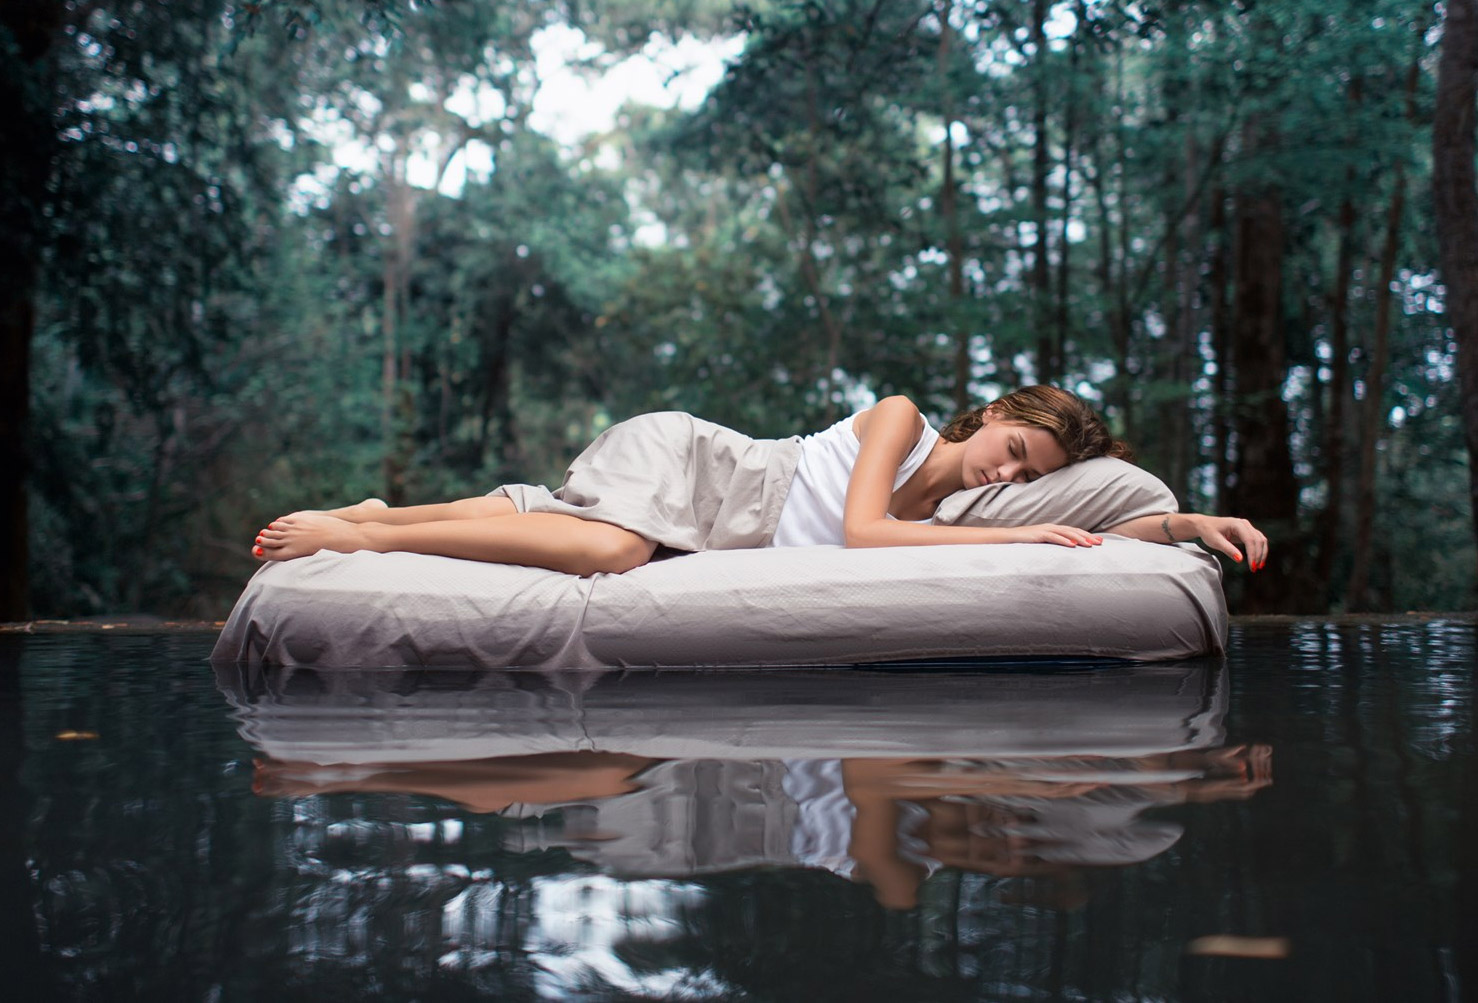 A white dress wearing girl sleeping on a white bed in the forest